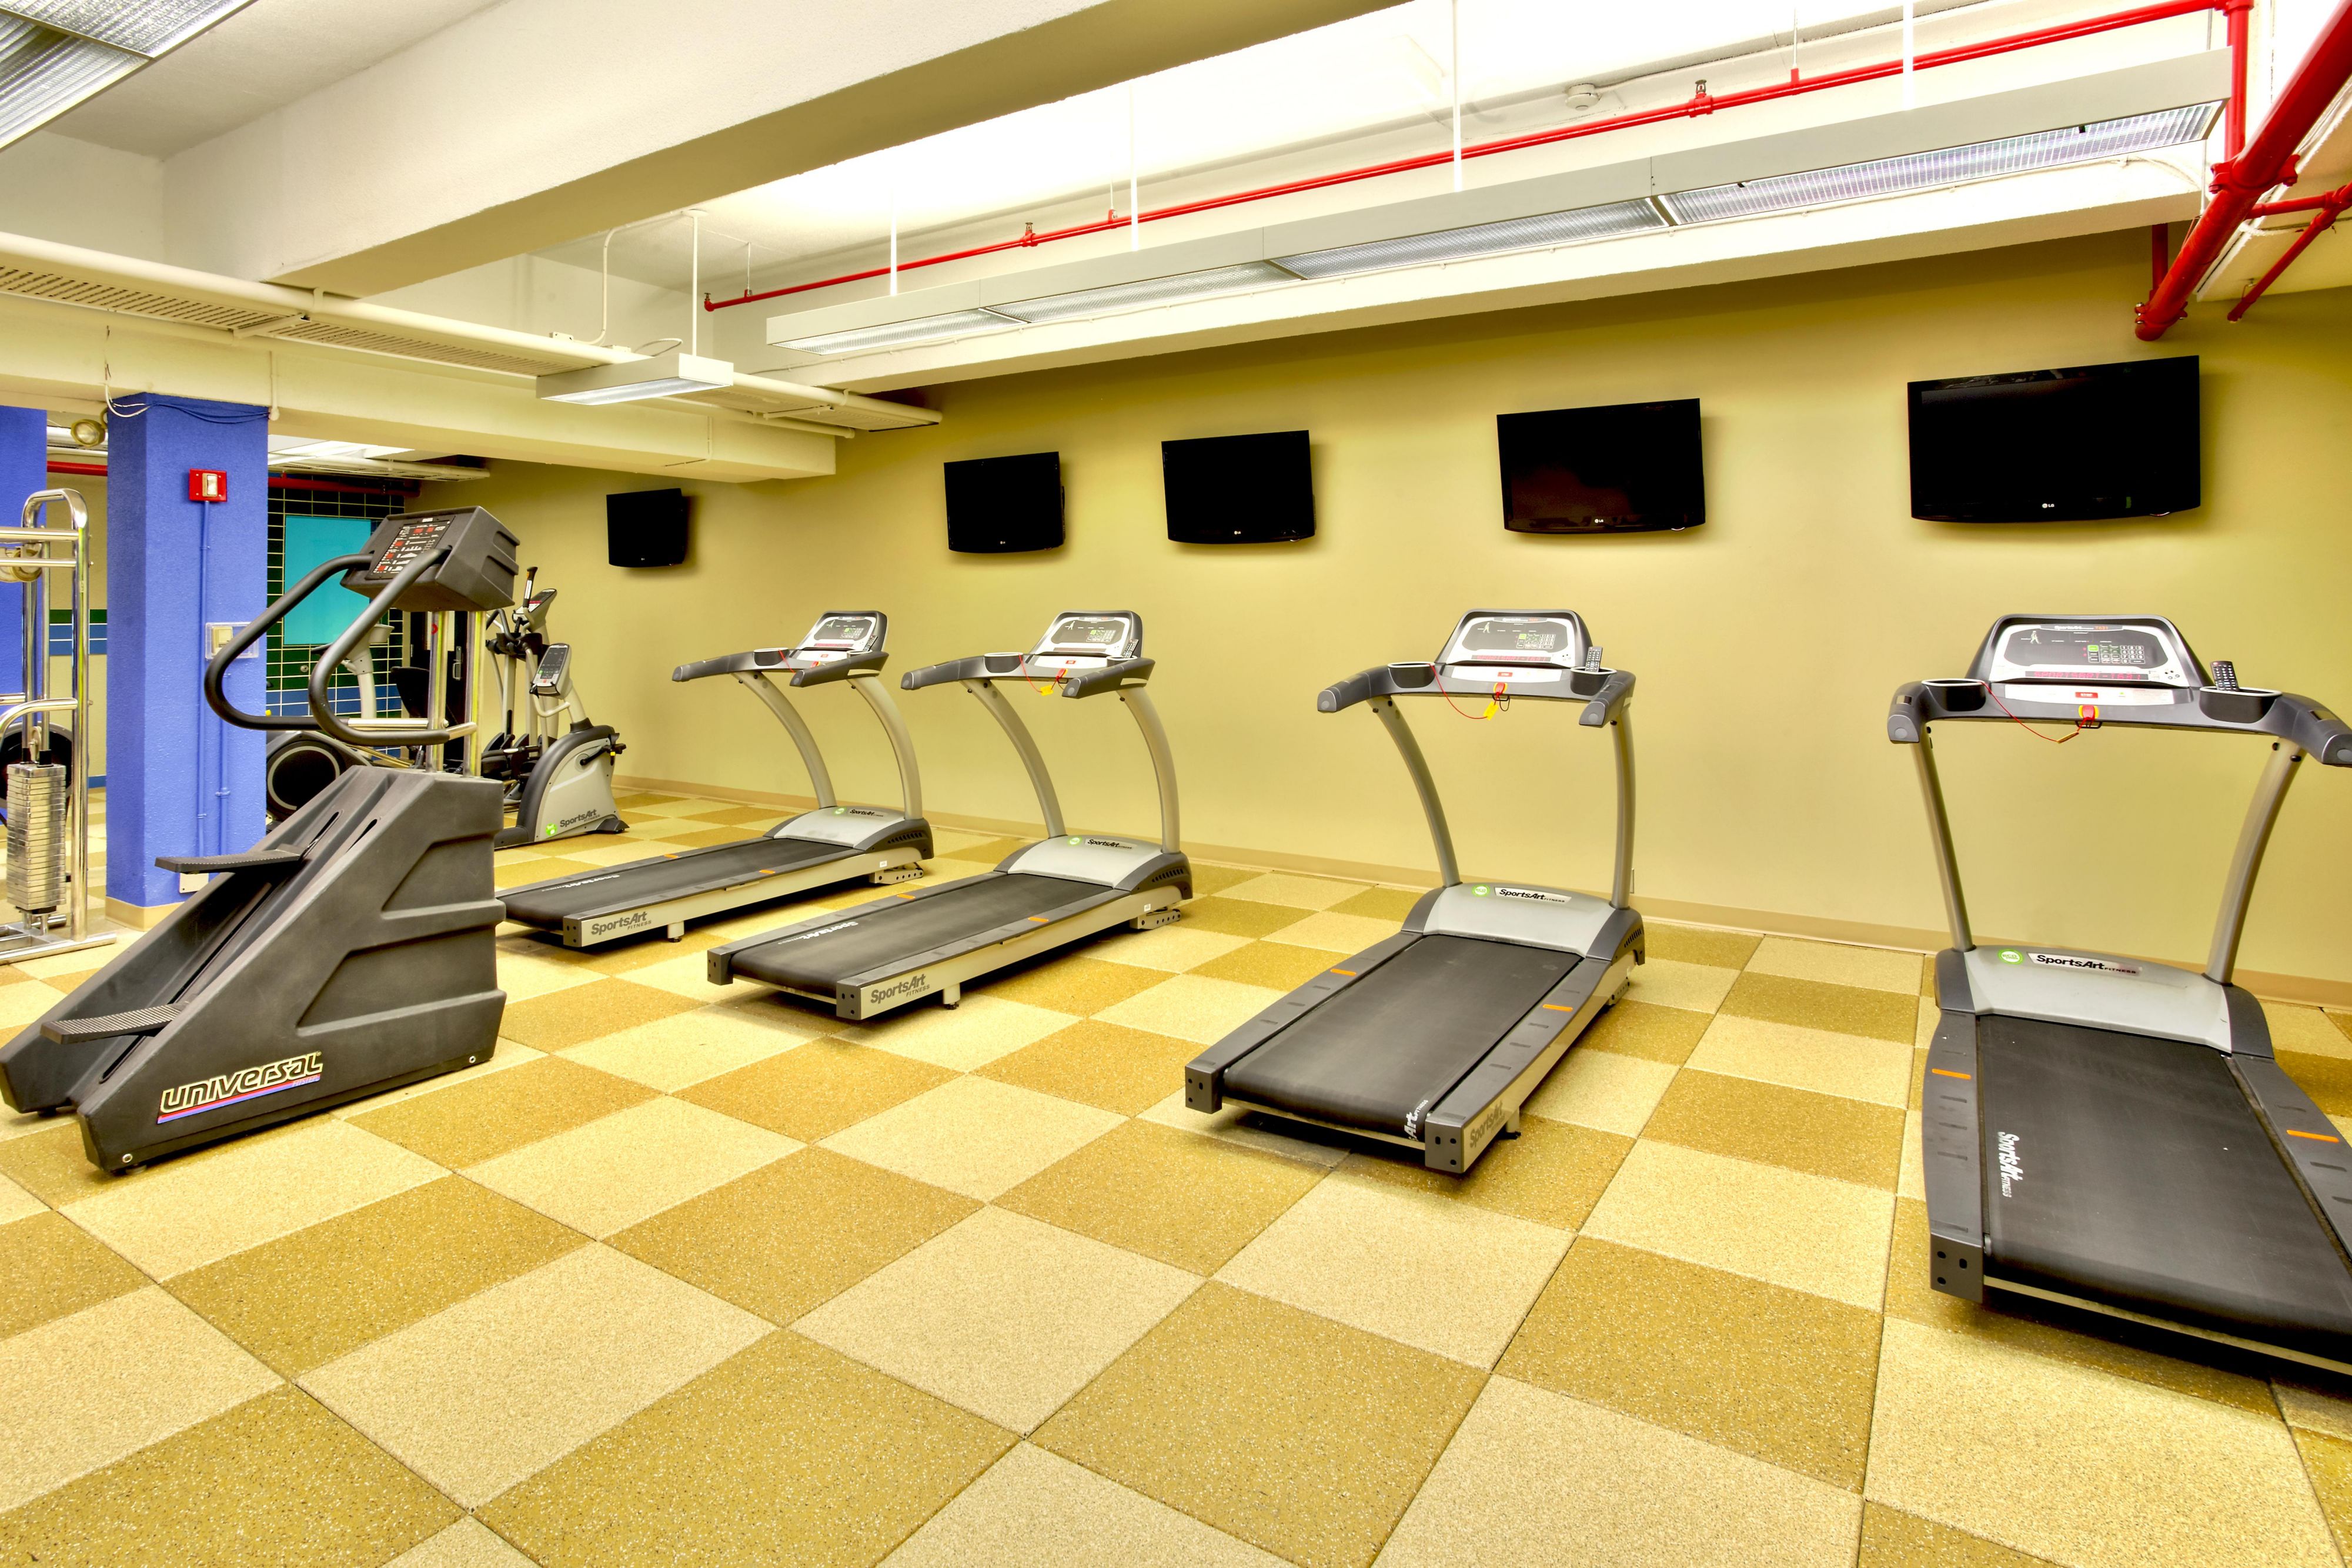 Continue your workout regimen in our fitness center